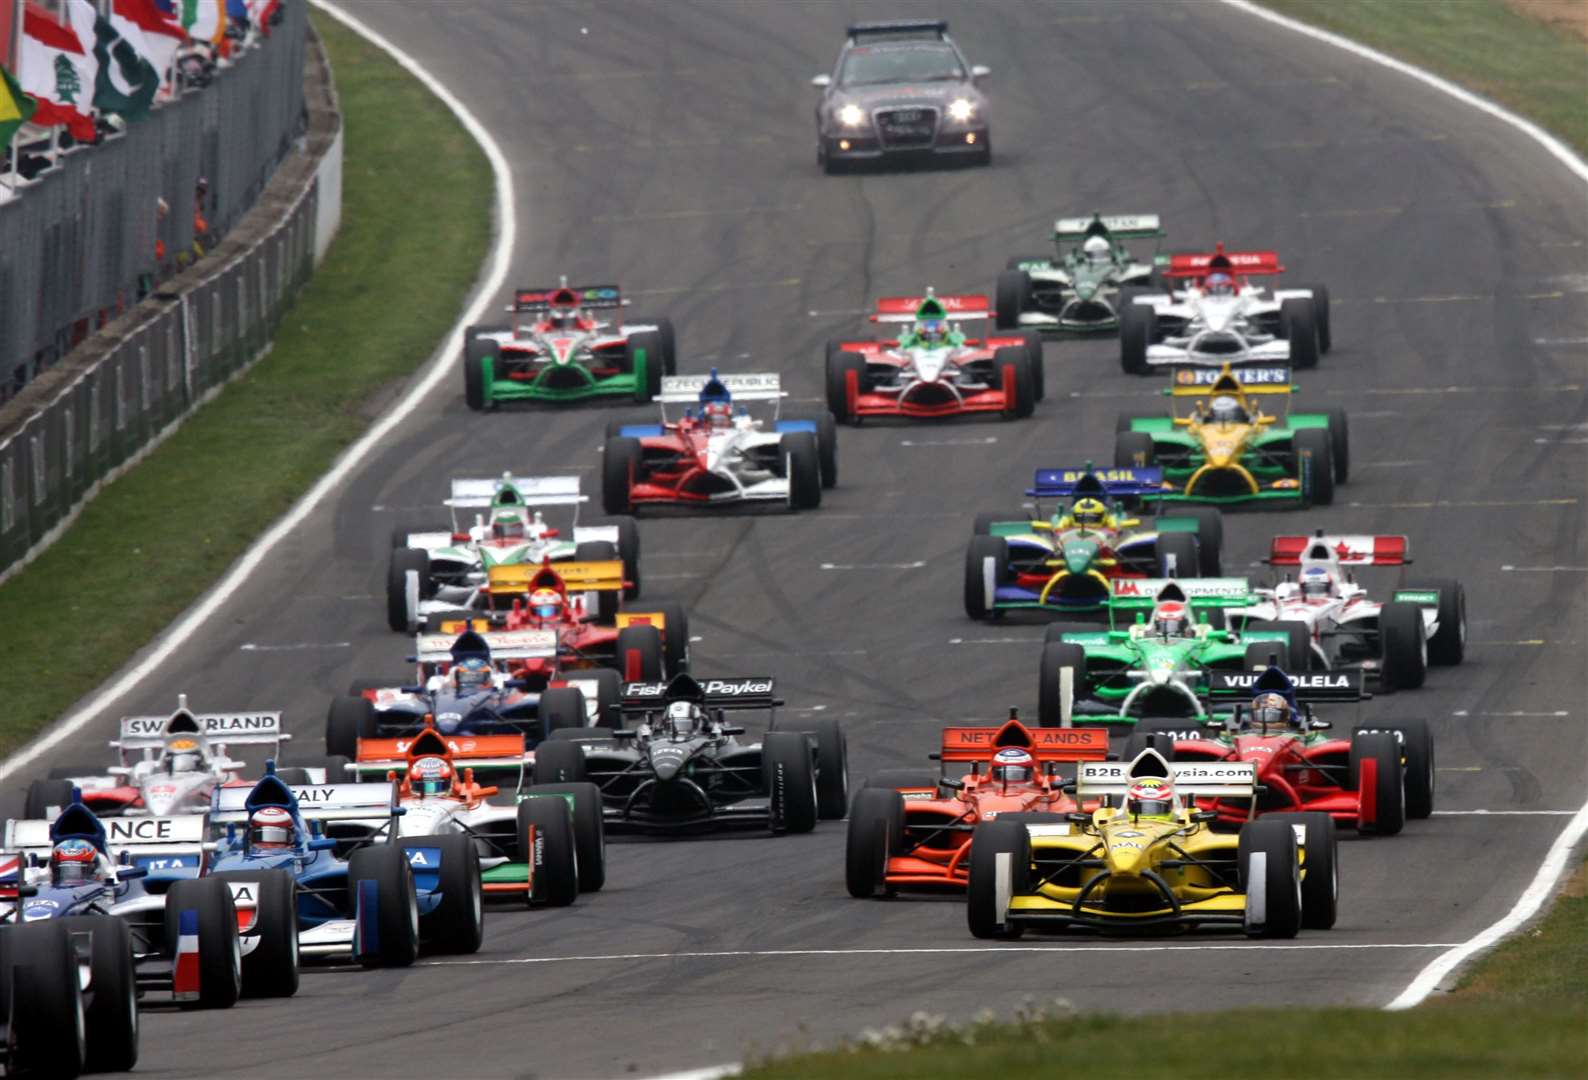 The start of the sprint race in April 2007; like Formula E, most of the events were held during the F1 off-season